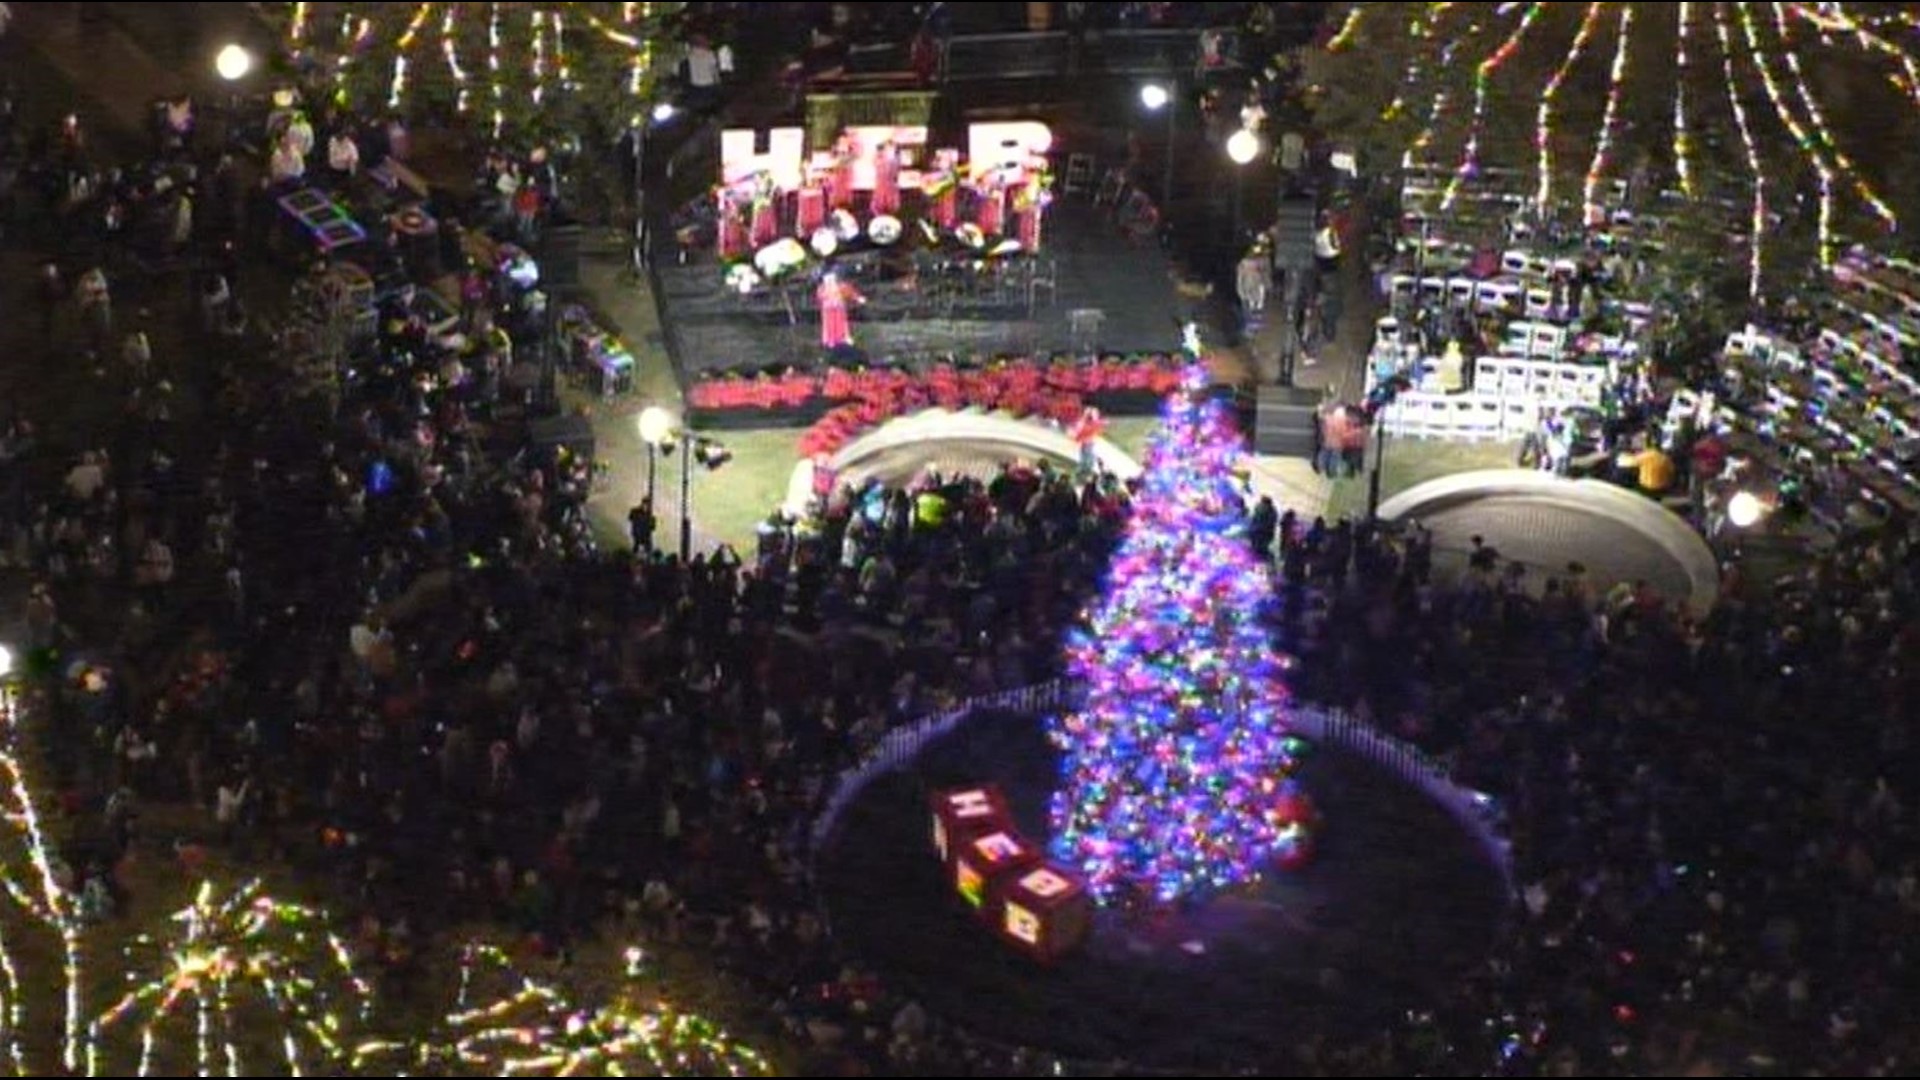 The annual lighting of the H-E-B-sponsored tree at Travis Park marks the start of the Christmas season in the Alamo City.